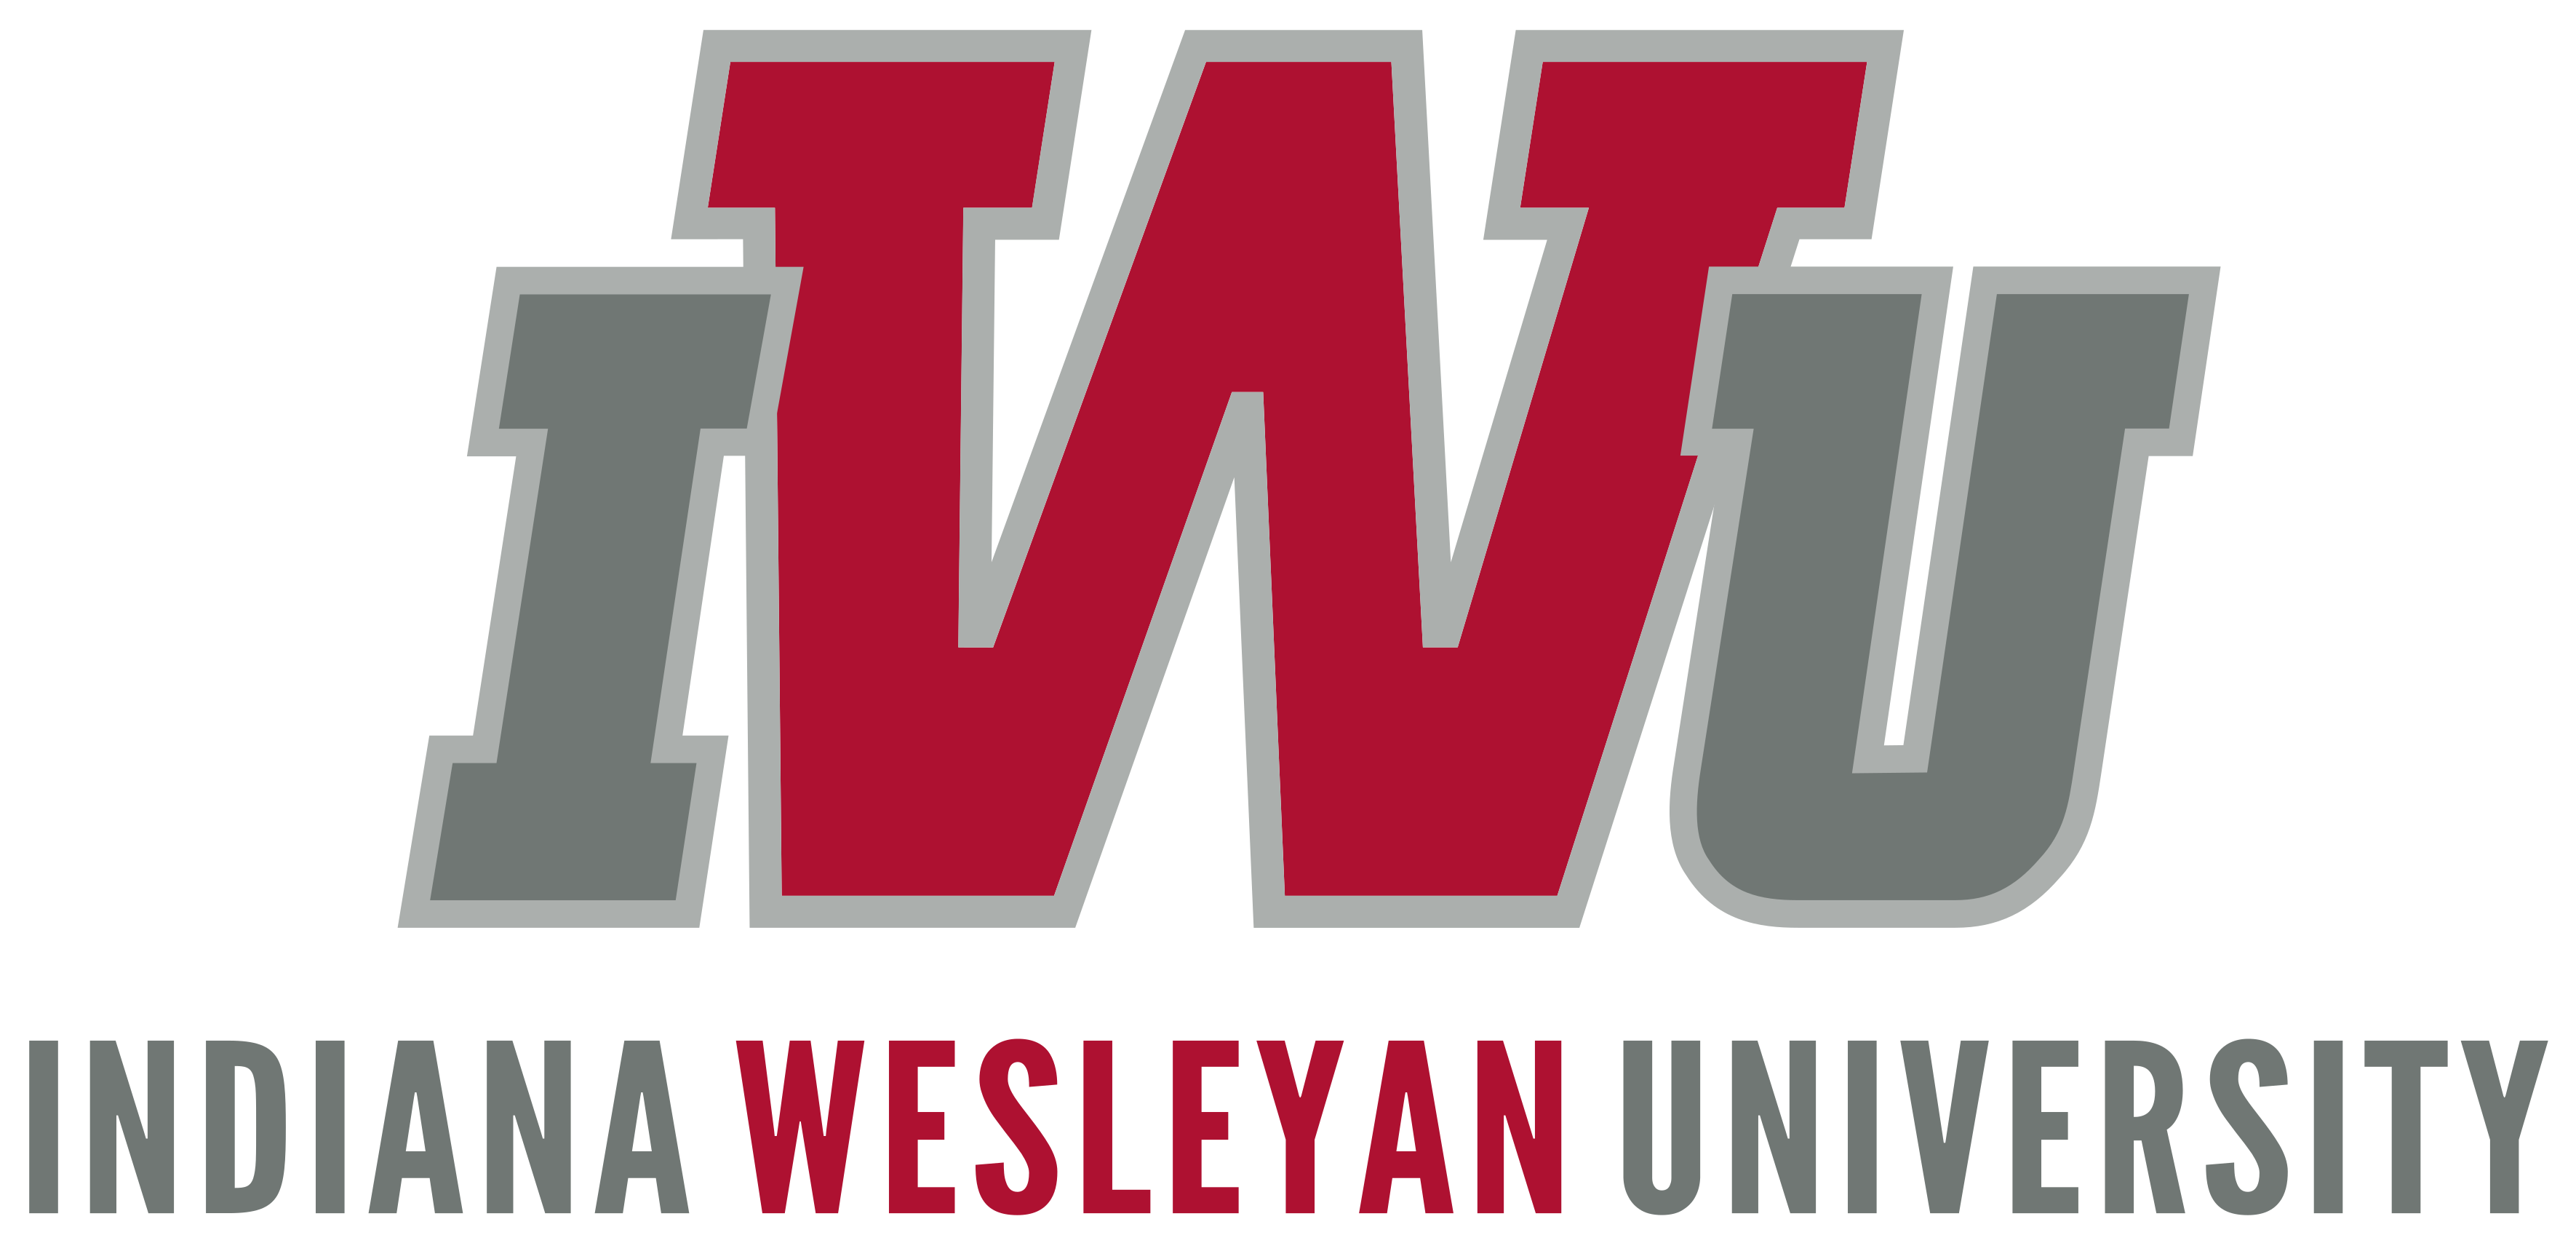 Indiana Wesleyan A history of innovative education, a future of global